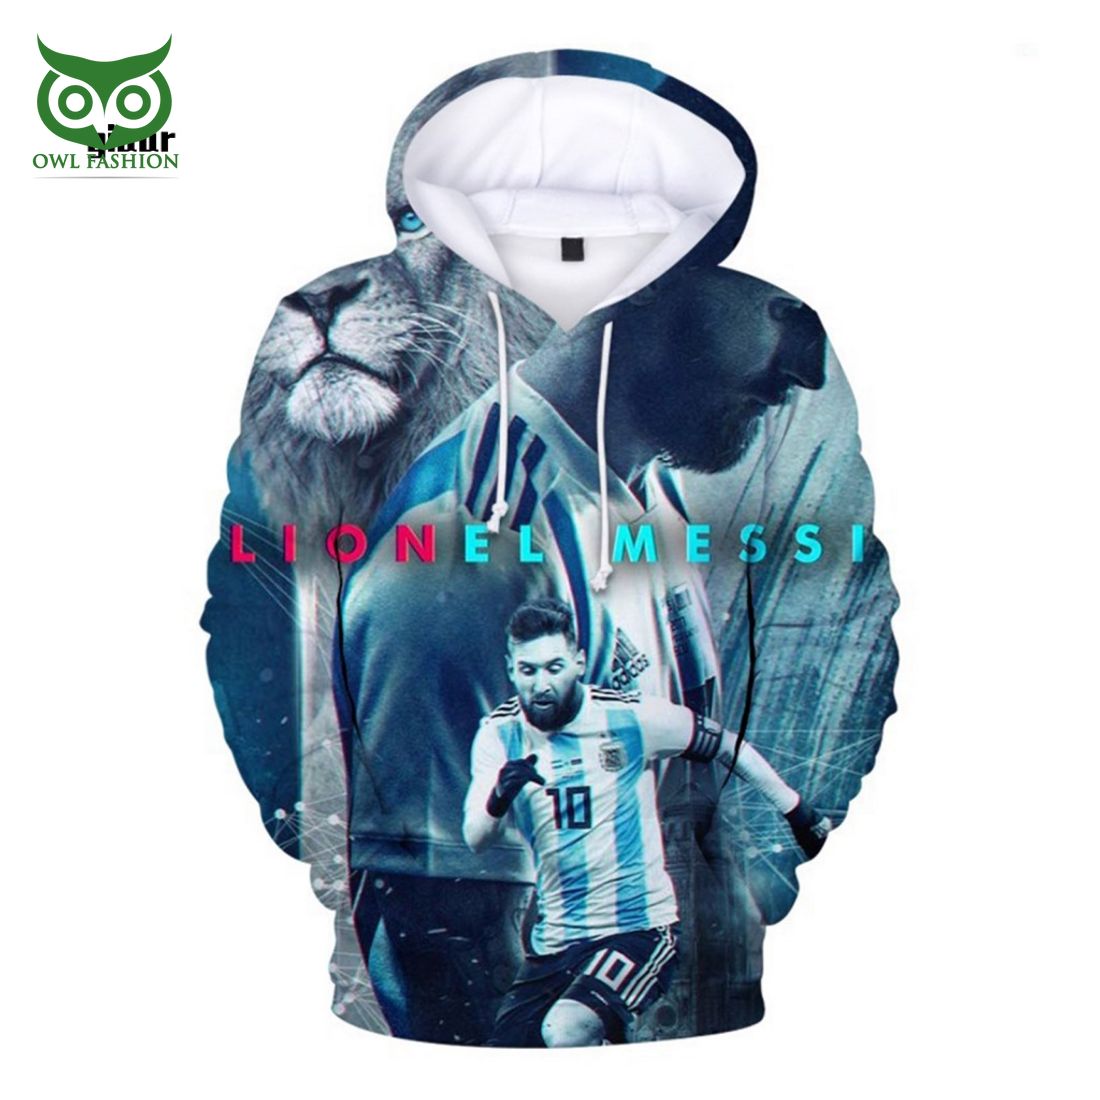 messi 10 goat greatest of all time champions 2022 hoodie 1 ptCTG